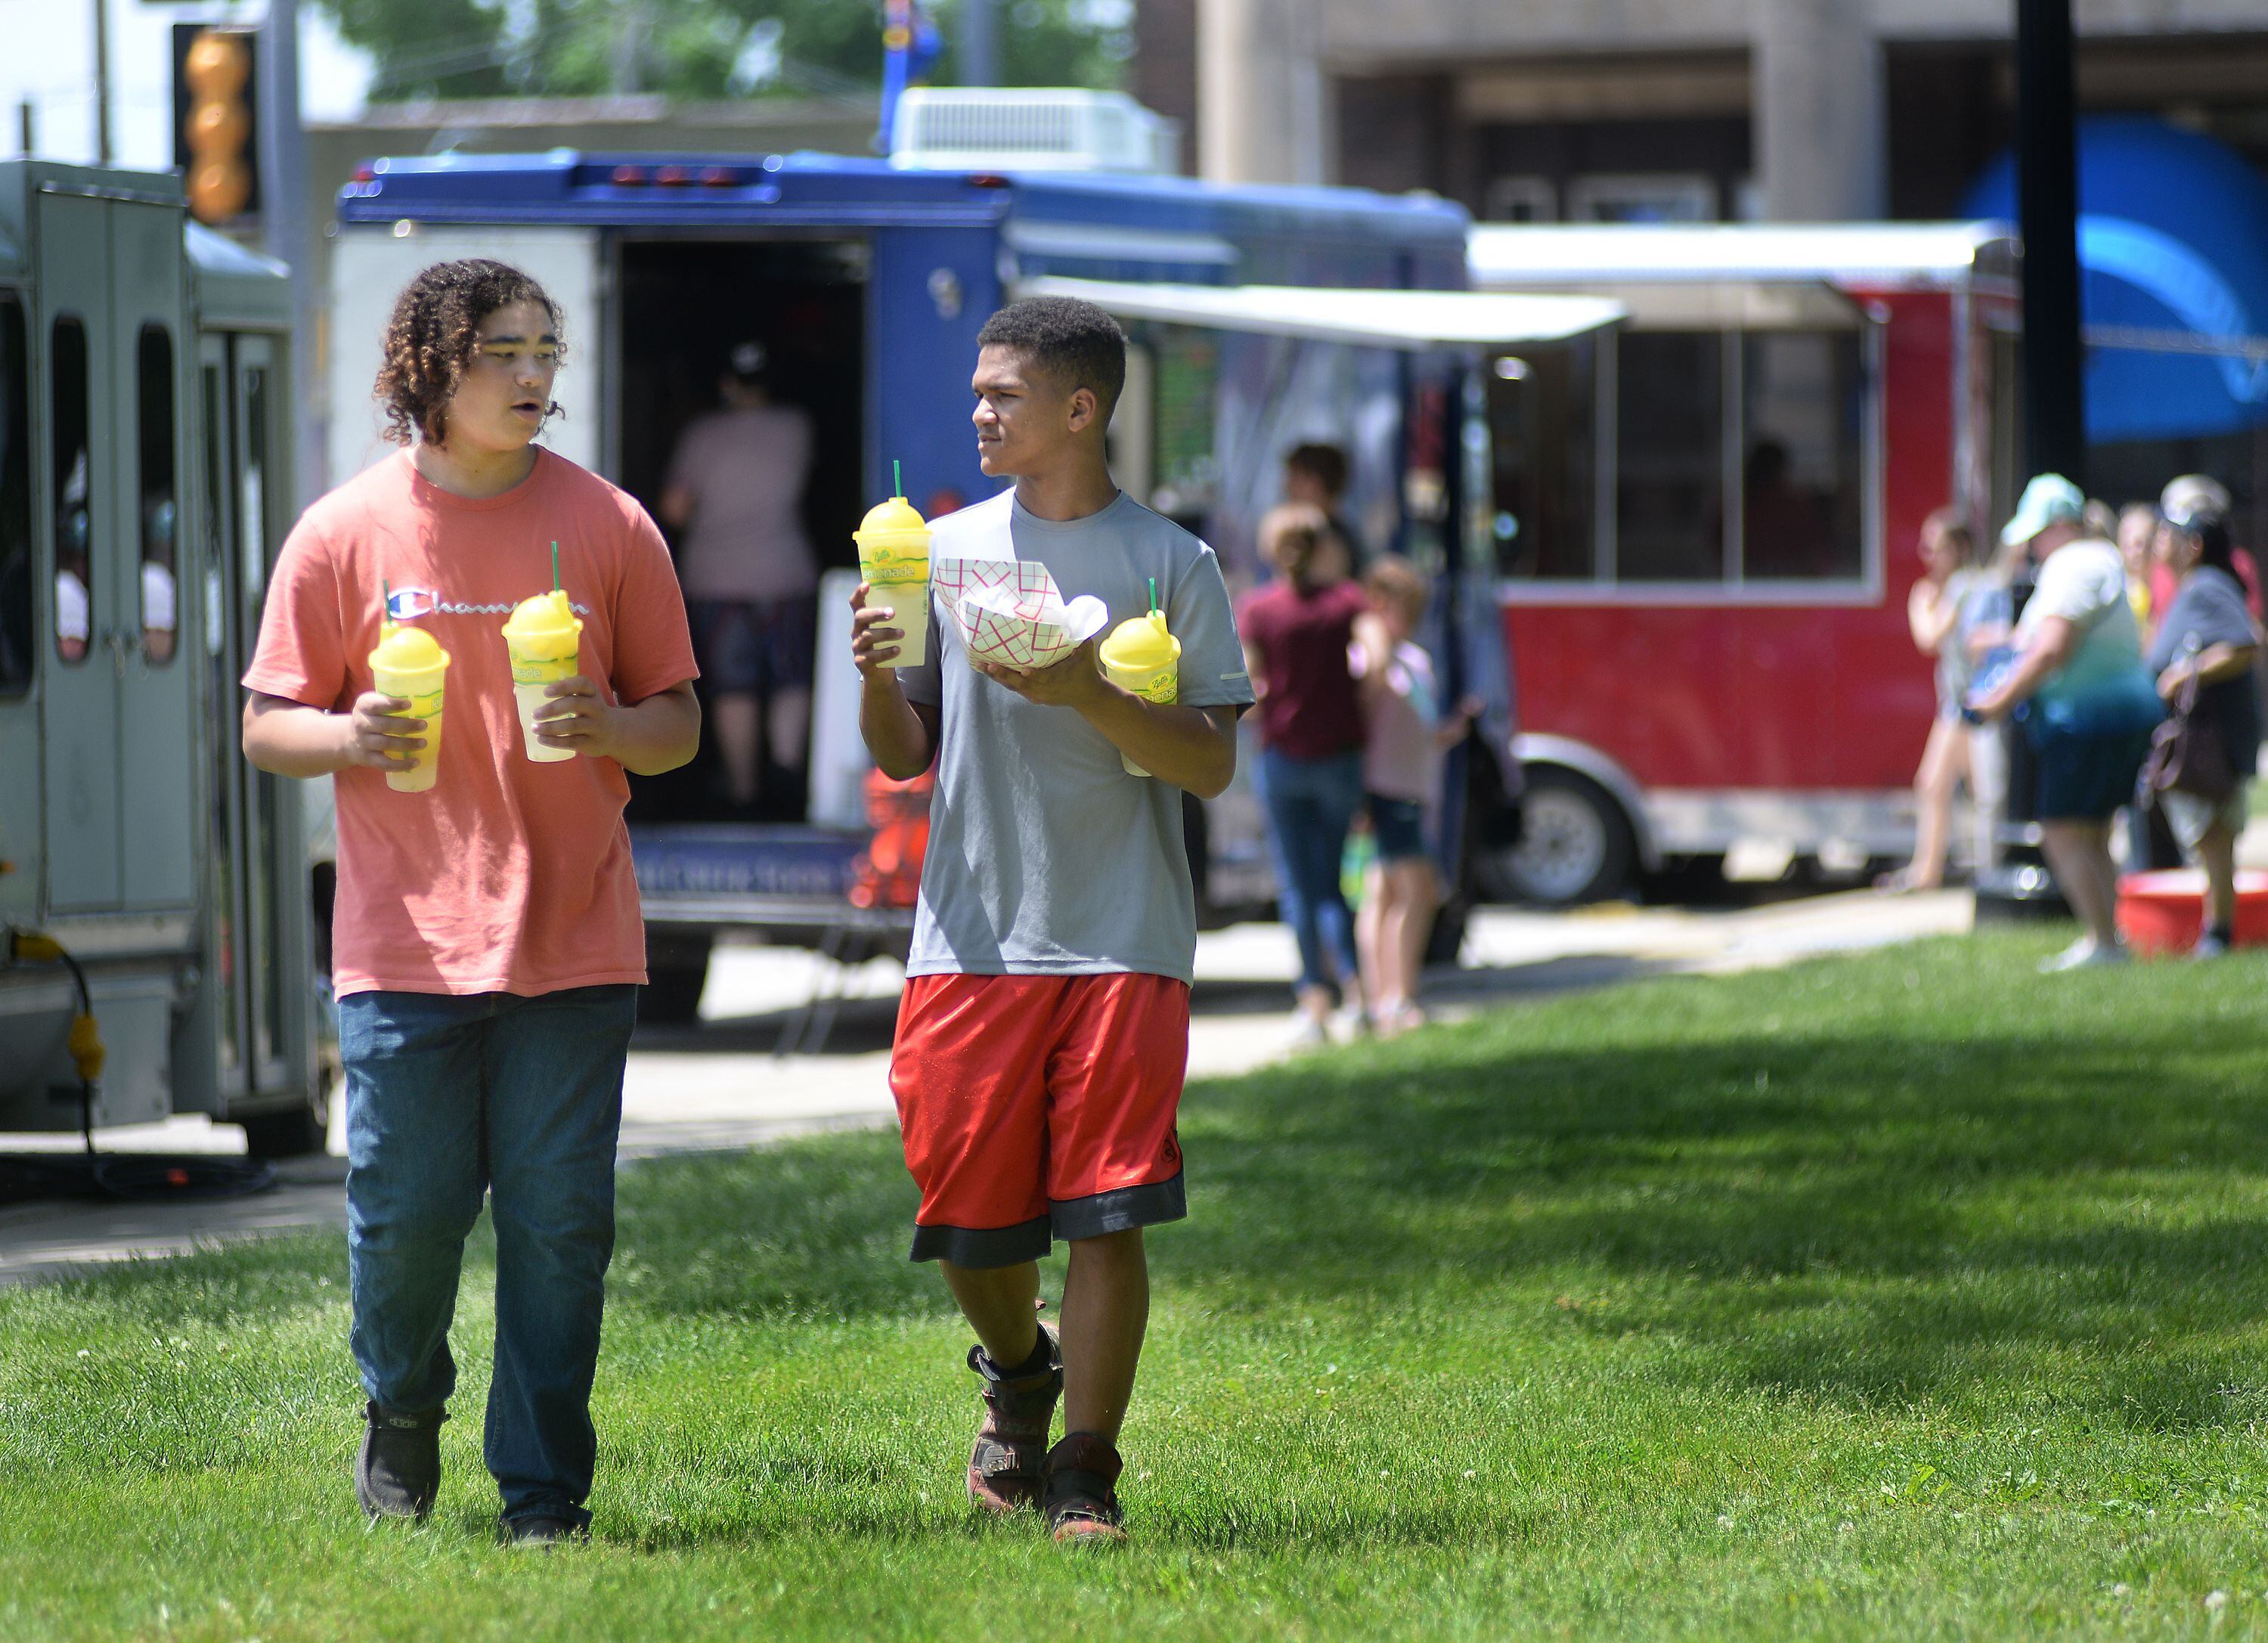 A large crowd enjoyed the Food Truck Festival on Saturday, May 22, 2021, at City Park in Streator. Foods varied from corn dogs, pretzels, Greek cuisine and pizza, among other items.